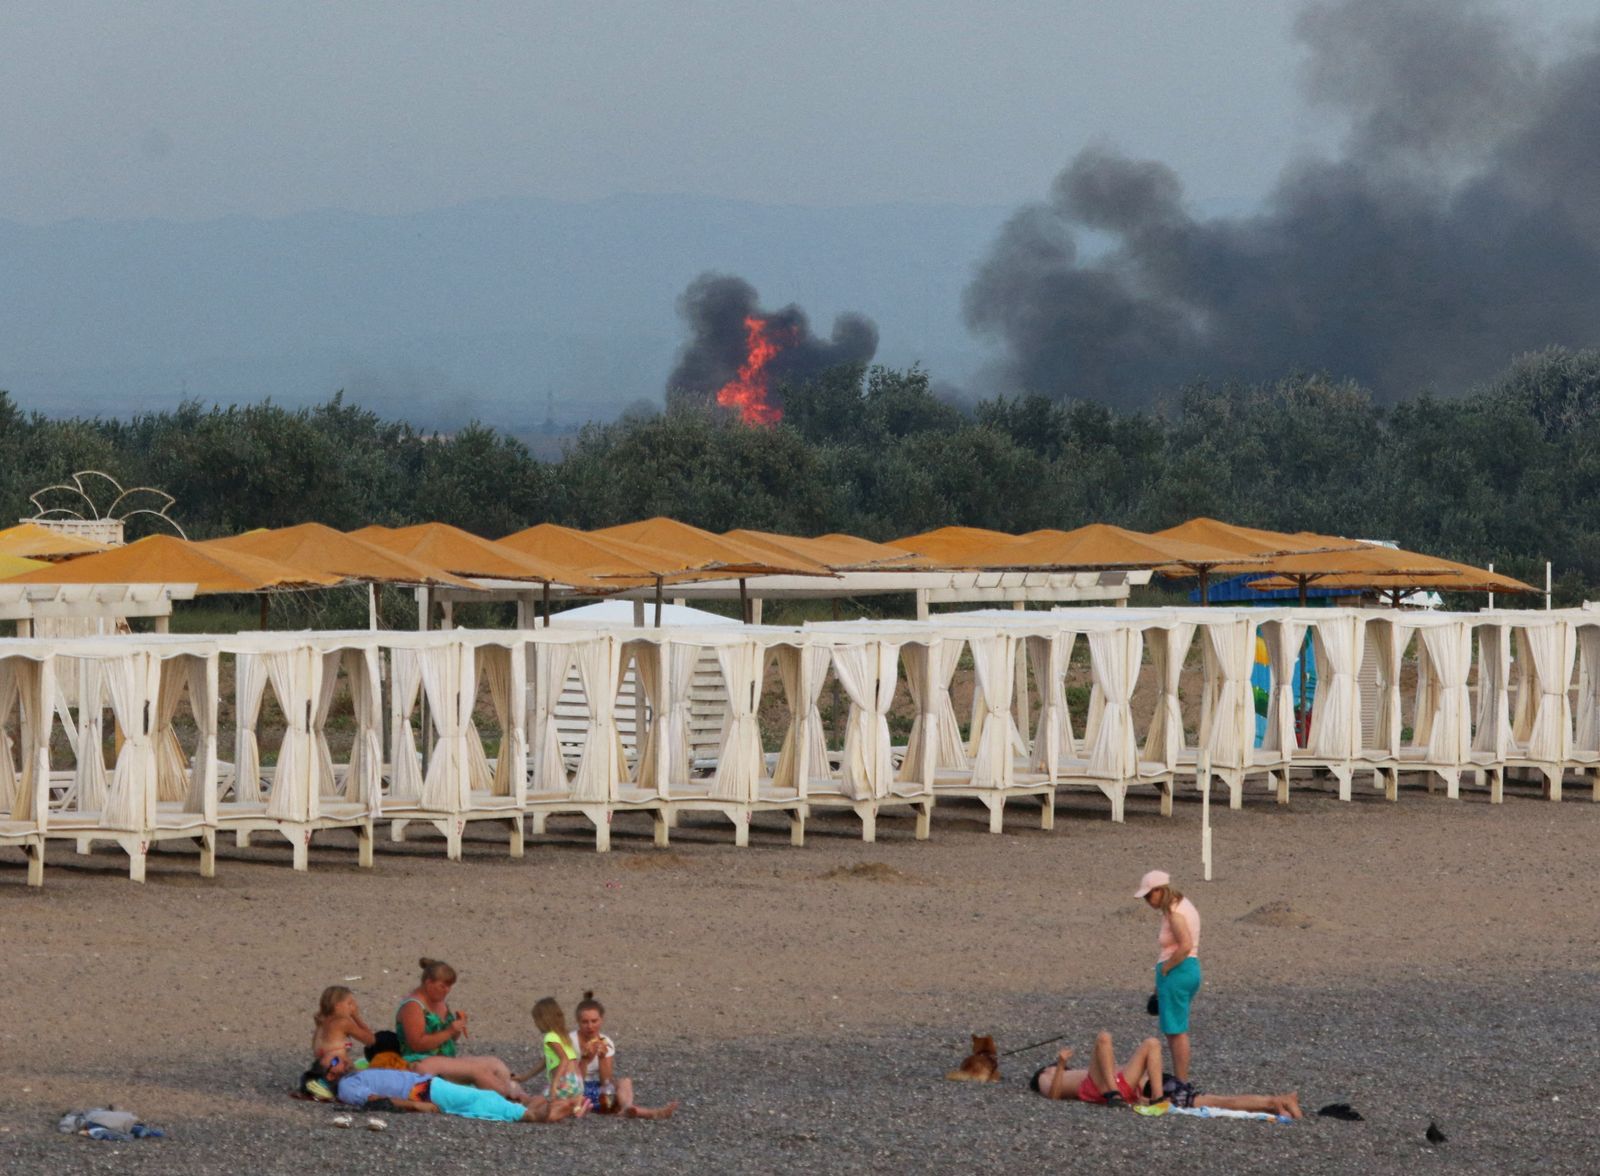 People rest on a beach as smoke and flames rise after explosions at a Russian military airbase, in Novofedorivka - REUTERS